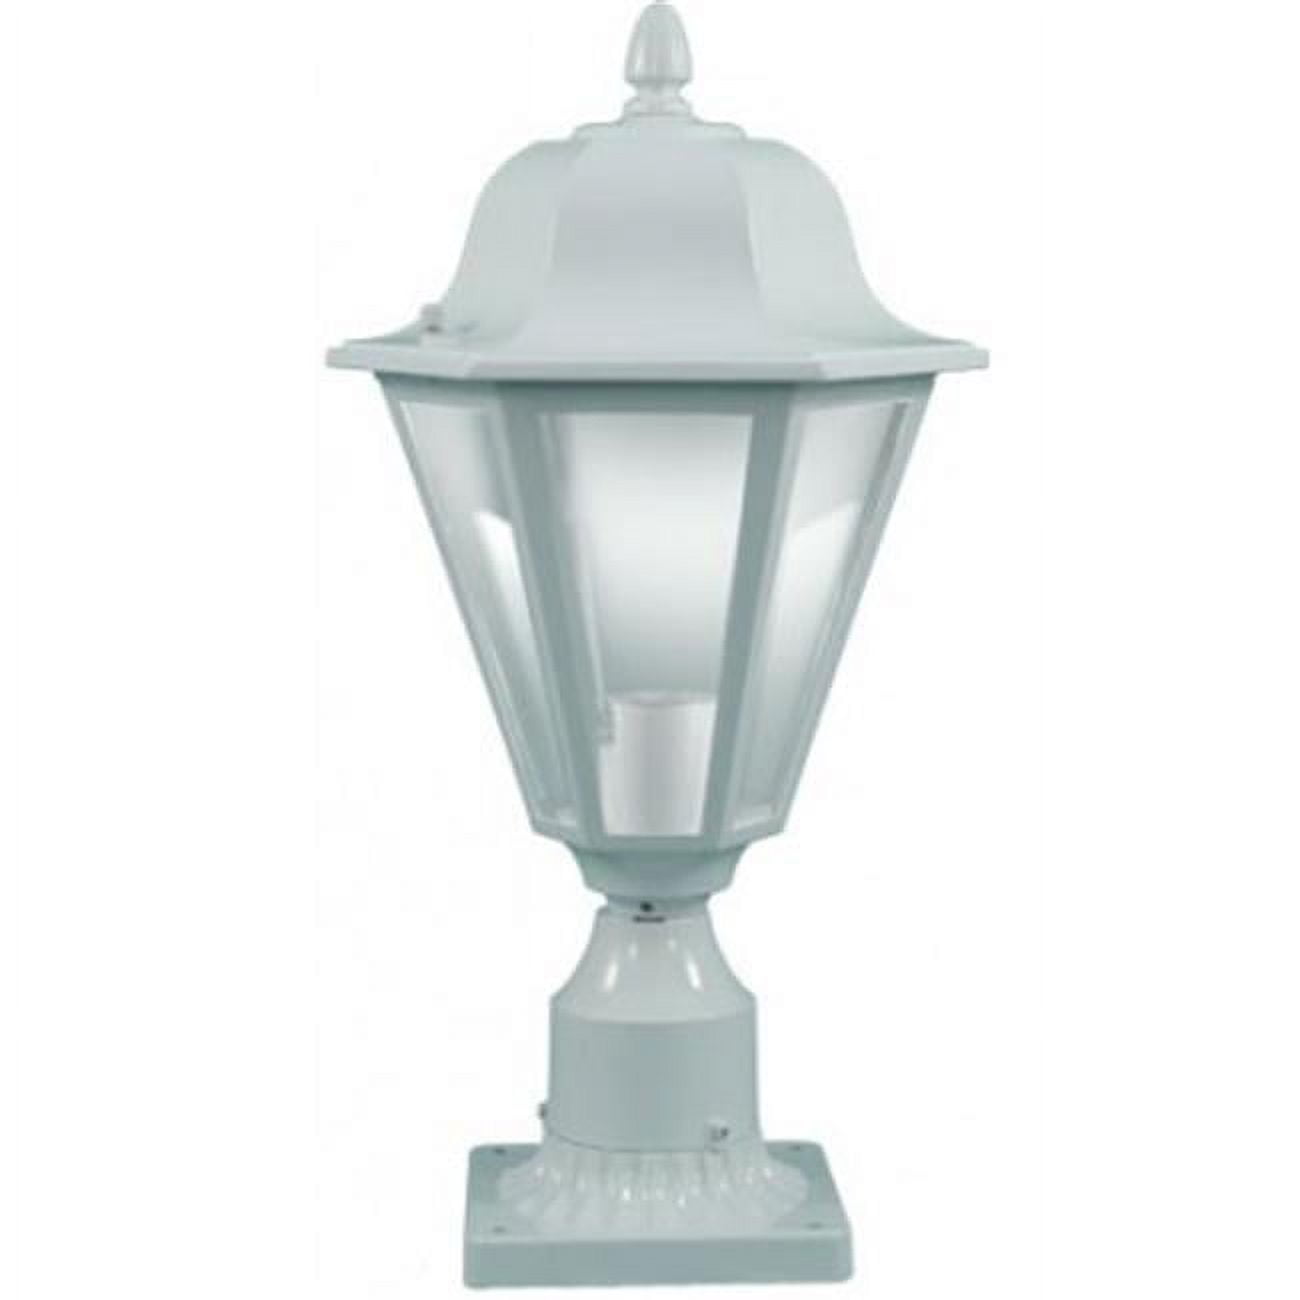 Picture of Dabmar Lighting GM131-W 13W & 120V S13-GU24 Daniella Post Top Light Fixture with Clear Glass - White